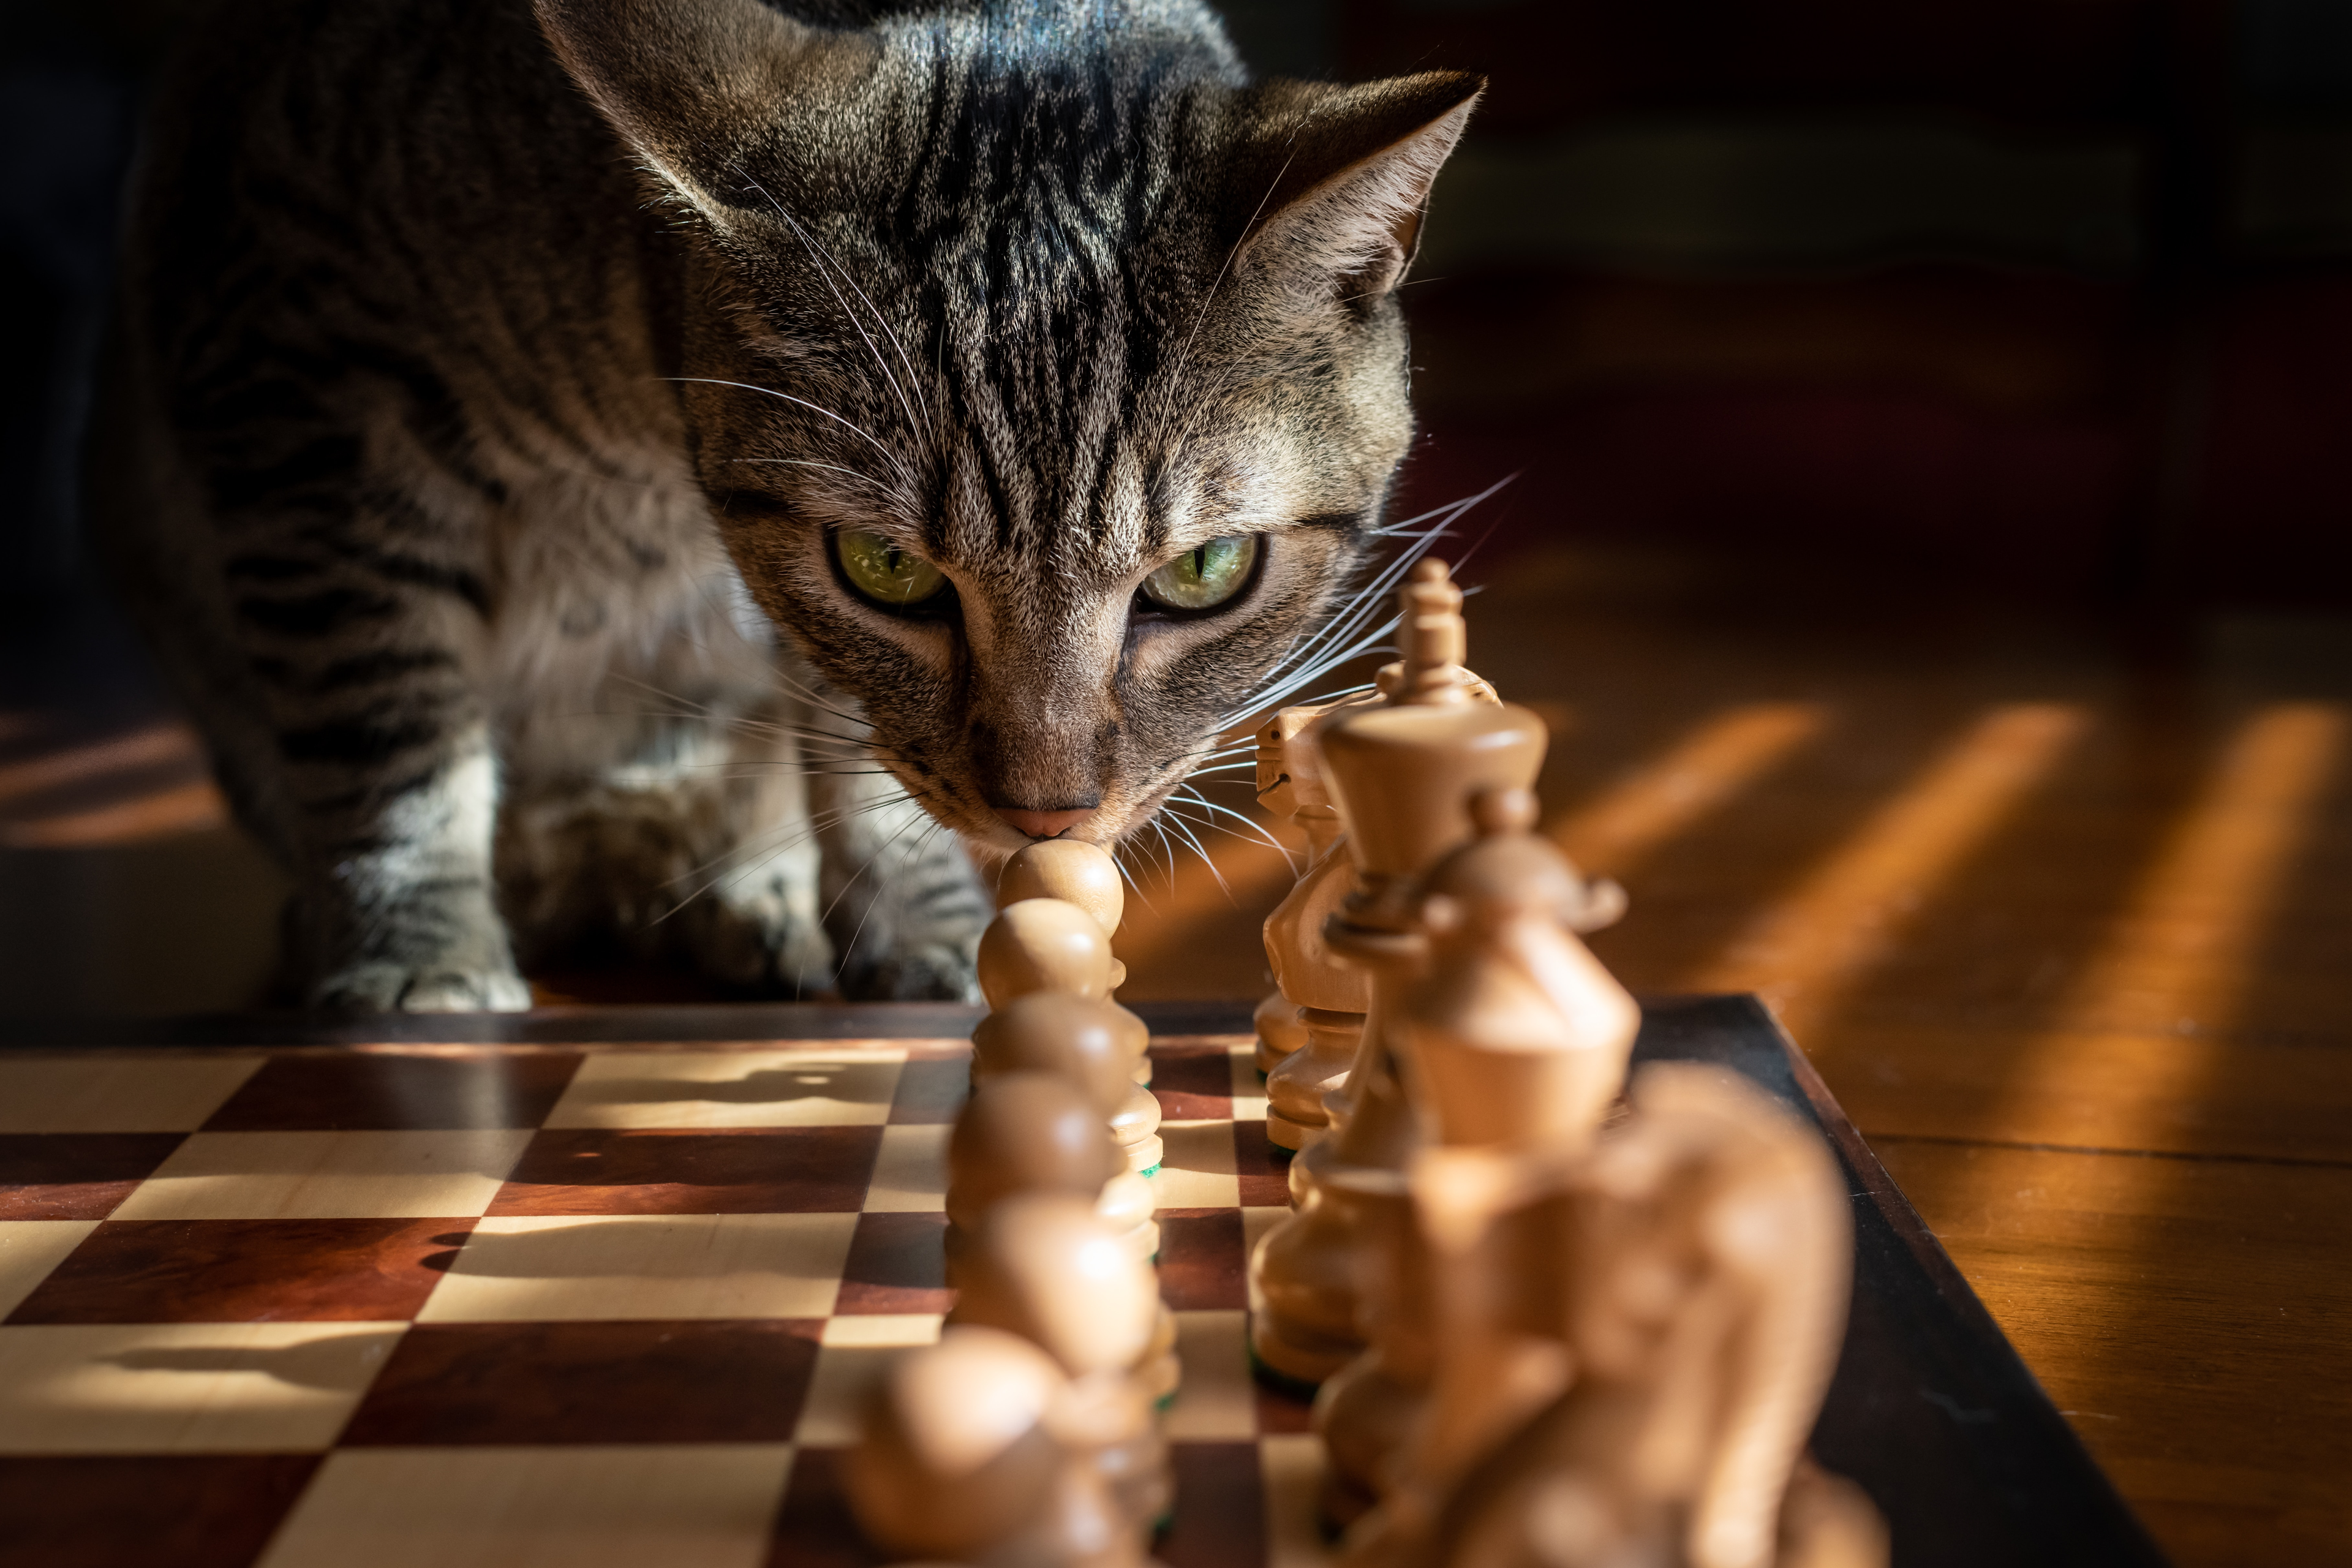 Chess board about to be attacked by a cat